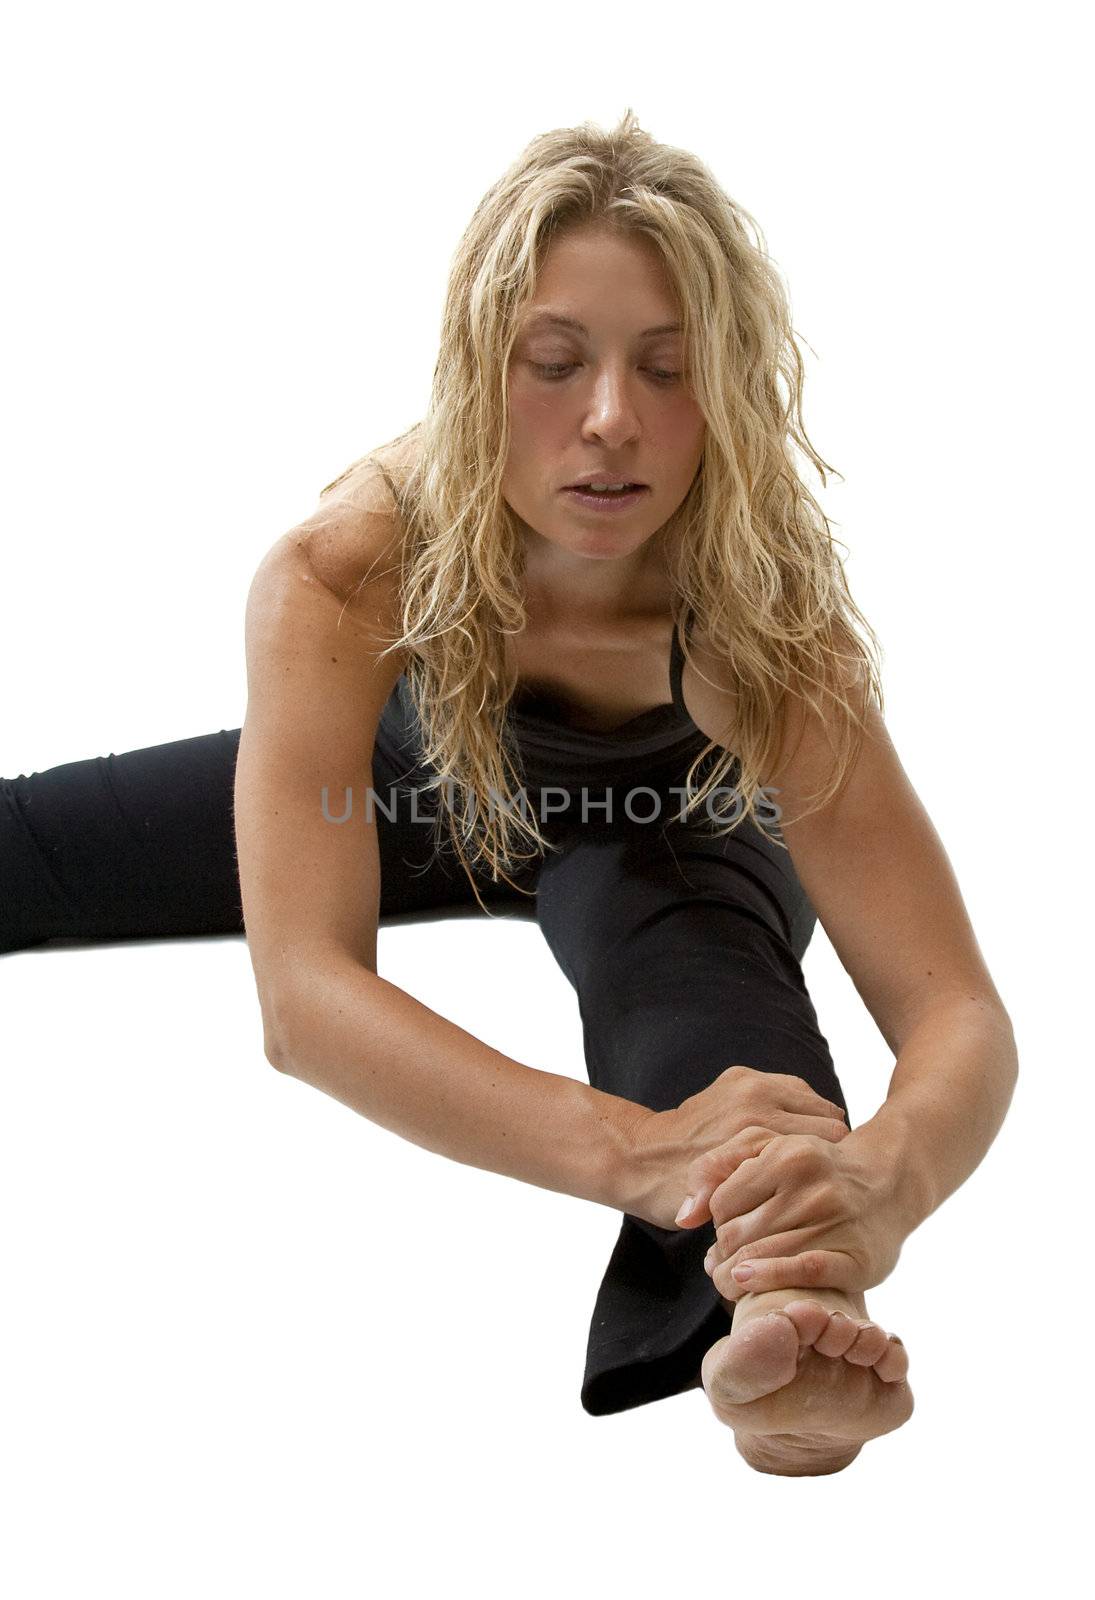 Blond woman bends, preparing for Yoga exercise by totony